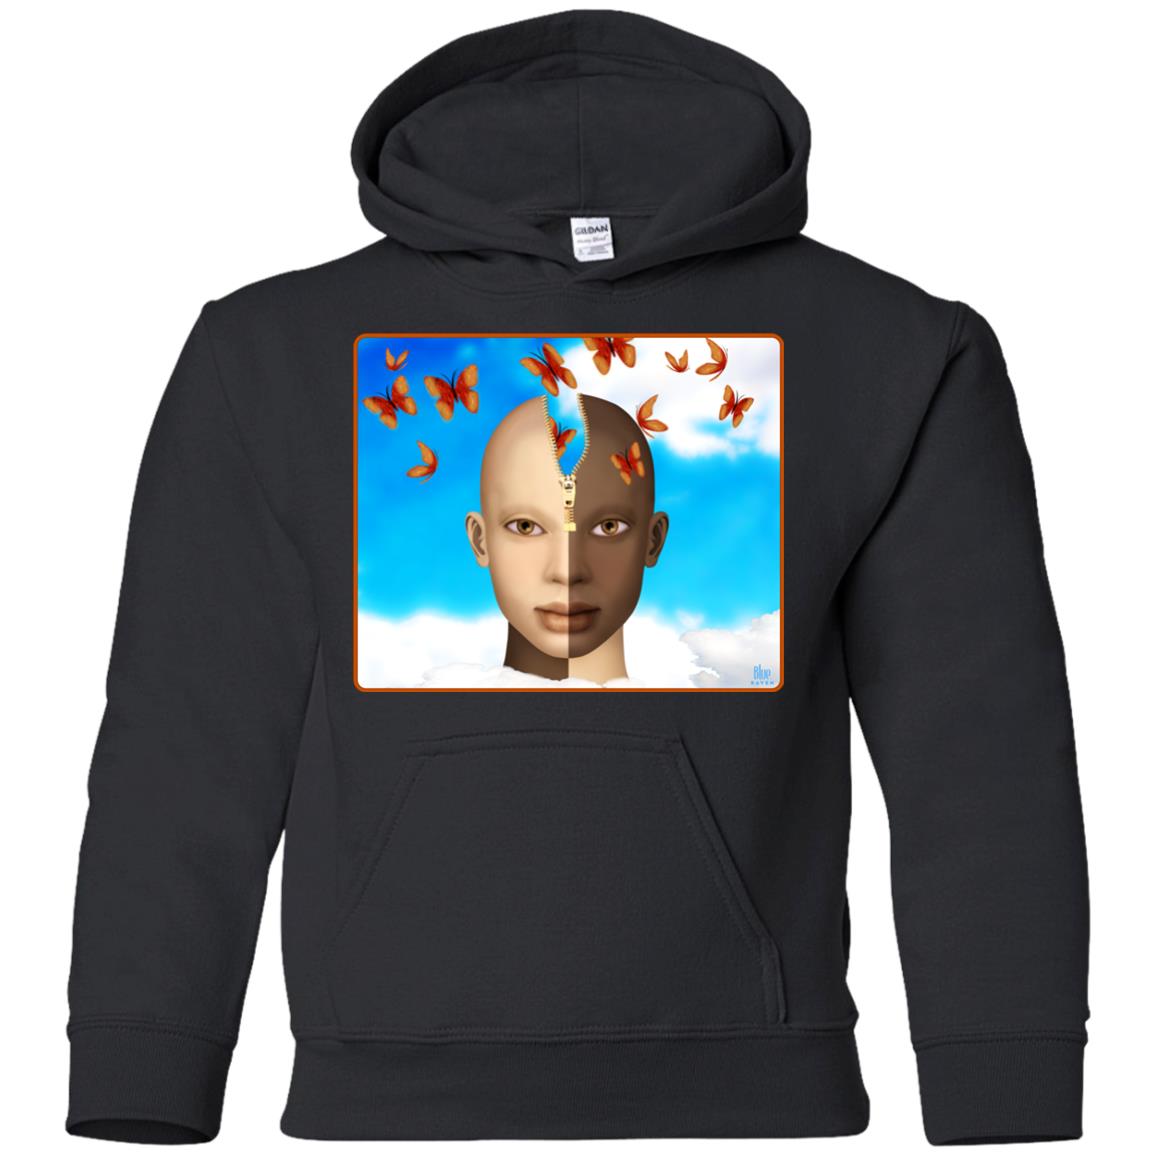 color of our thoughts - Youth Hoodie